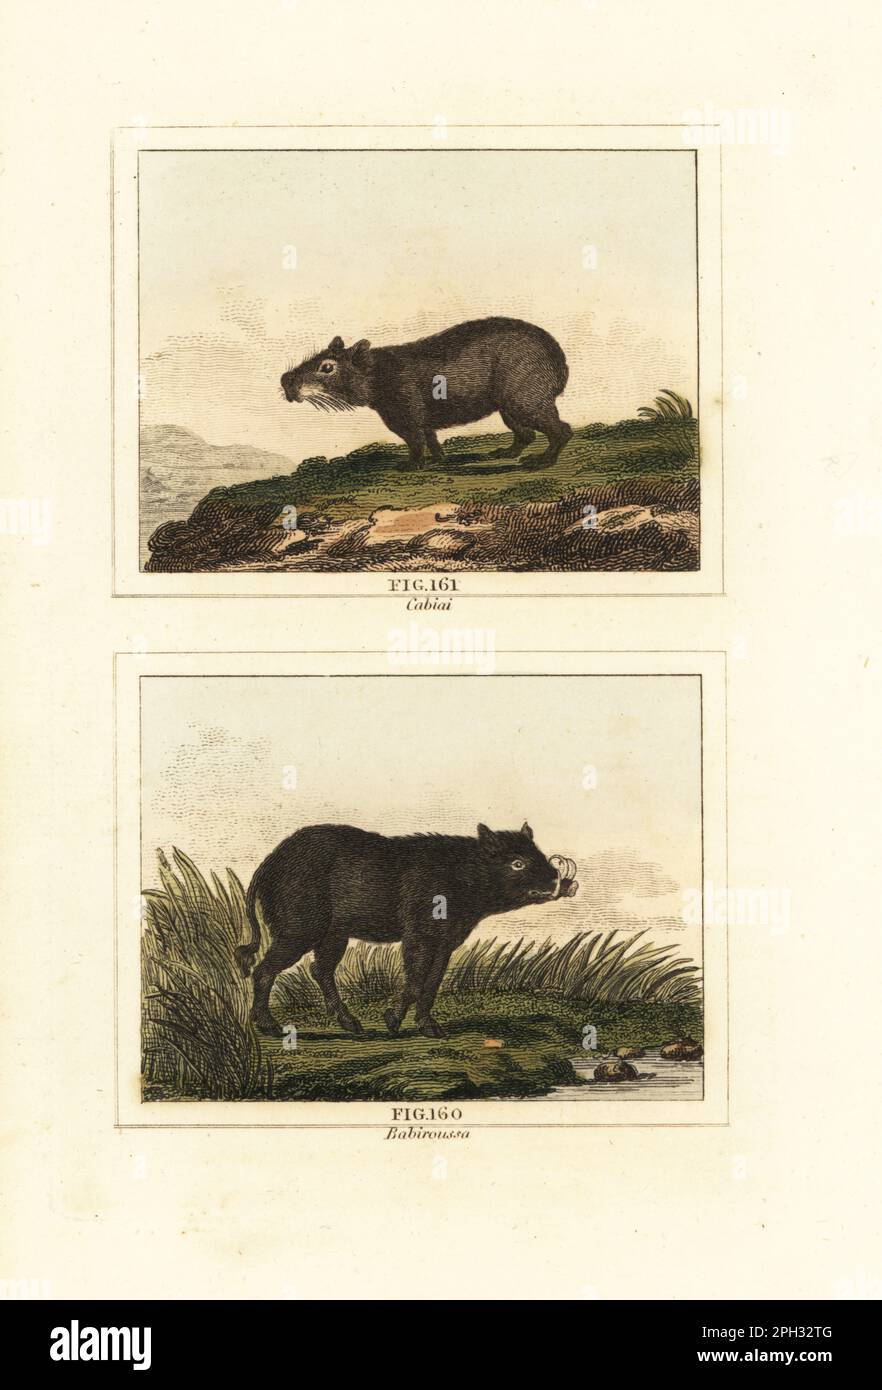 Capybara, Hydrochoerus hydrochaeris 161, and North Sulawesi babirusa, Babyrousa celebensis 160. Handcoloured copperplate engraving after Jacques de Seve from James Smith Barr’s edition of Comte Buffon’s Natural History, A Theory of the Earth, General History of Man, Brute Creation, Vegetables, Minerals, T. Gillet, H. D. Symonds, Paternoster Row, London, 1807. Stock Photo